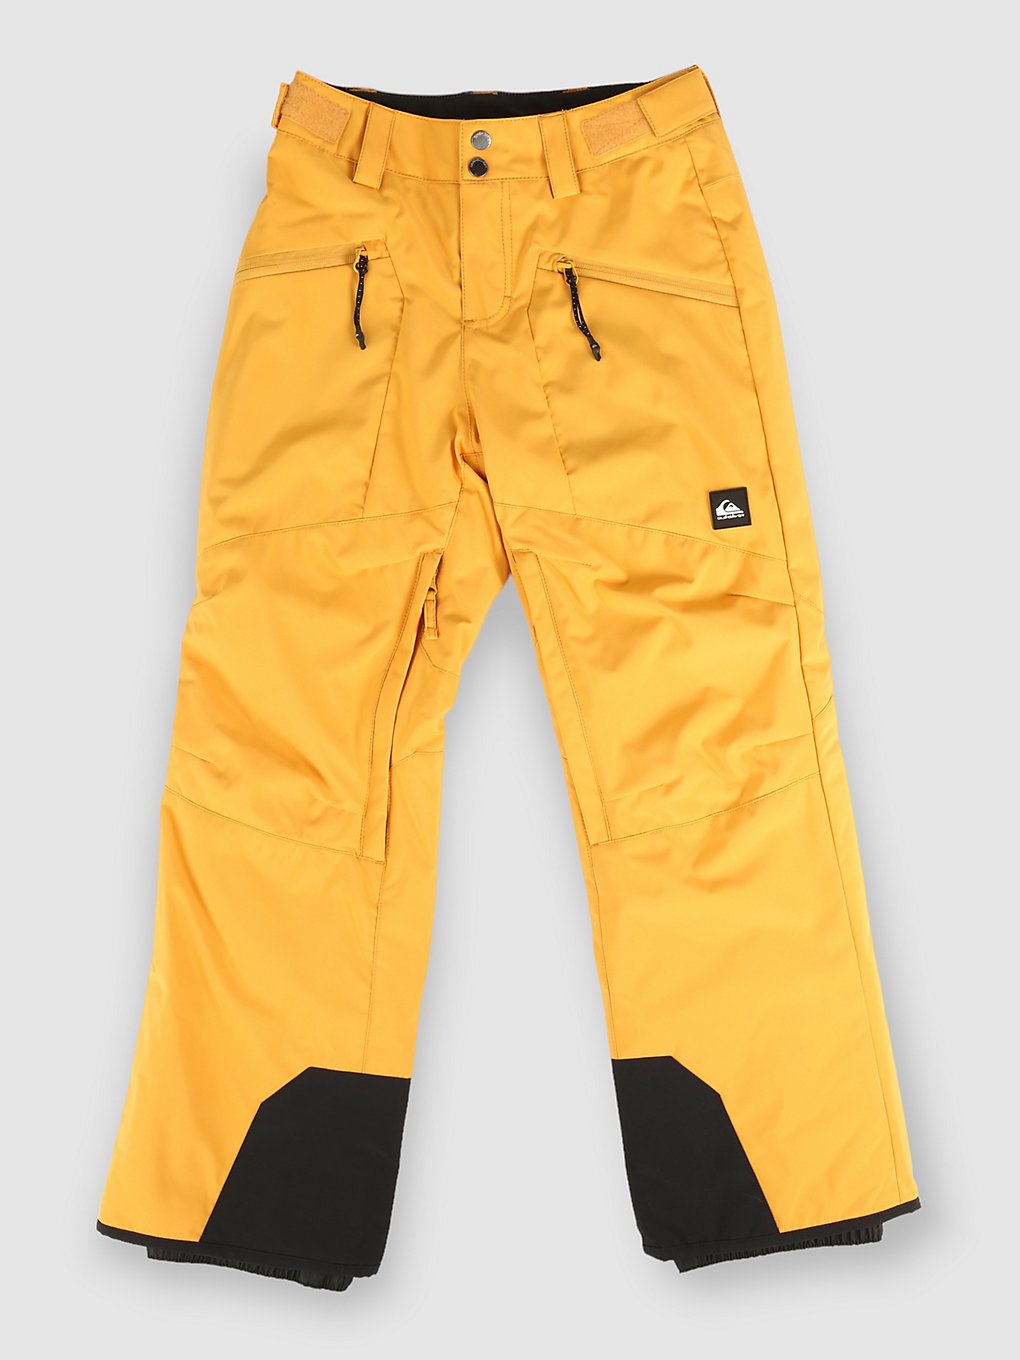 Quiksilver Boundry Hose mineral yellow kaufen